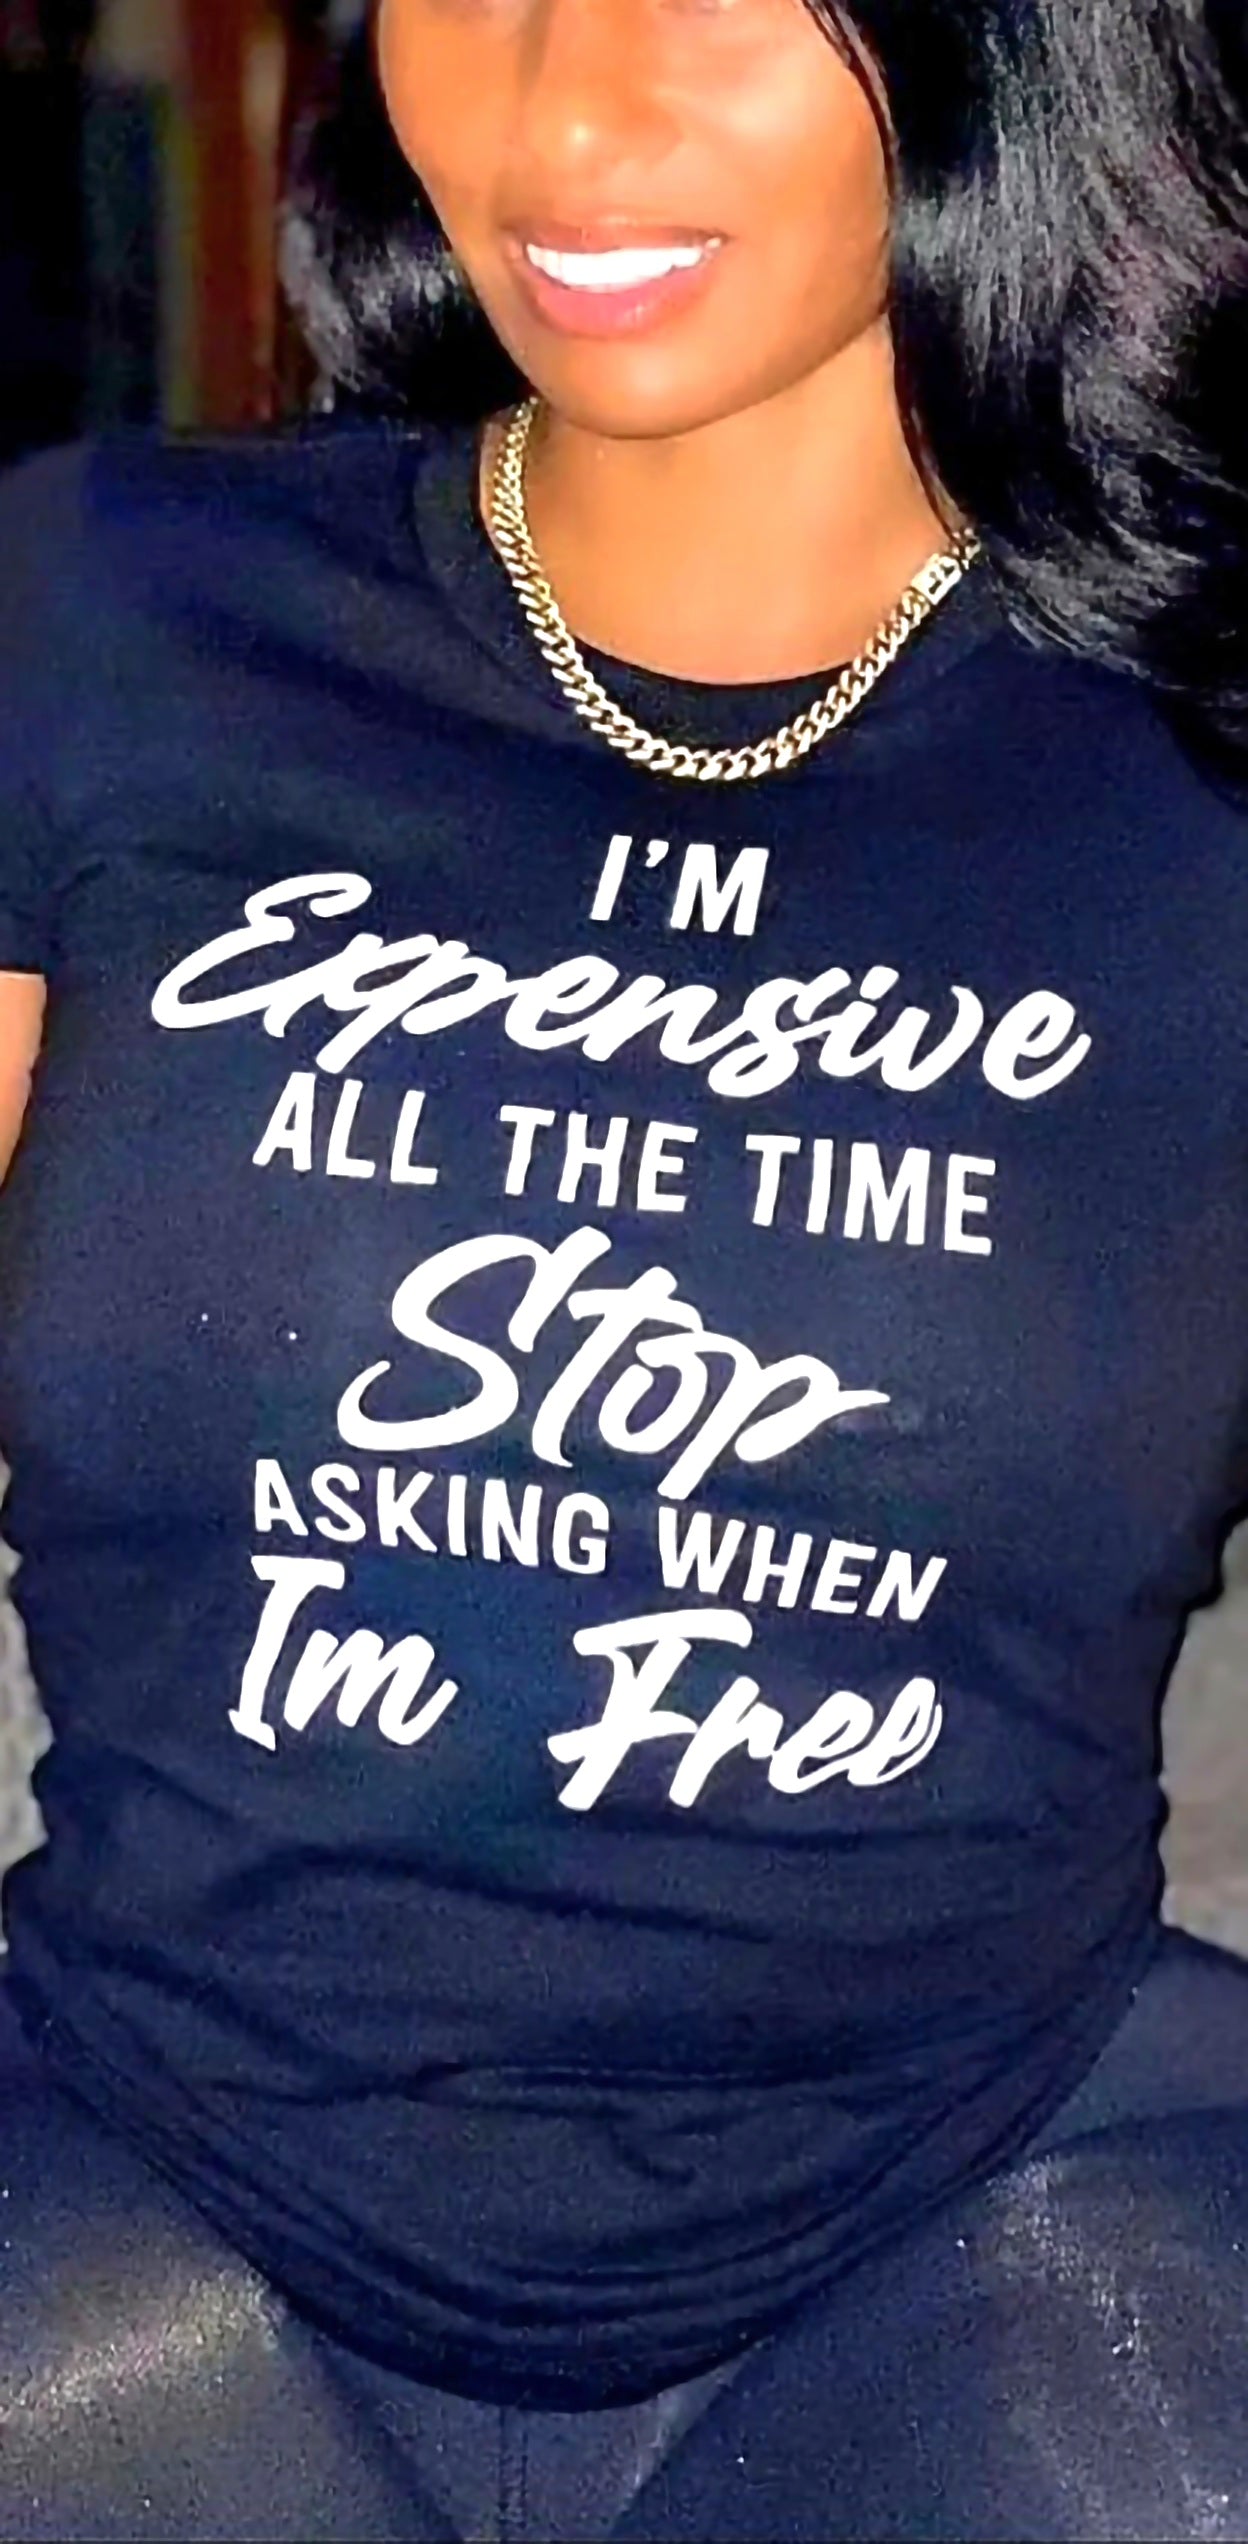 I'M EXPENSIVE ALL THE TIME STOP ASKING WHEN I'M FREE T-SHIRTS!